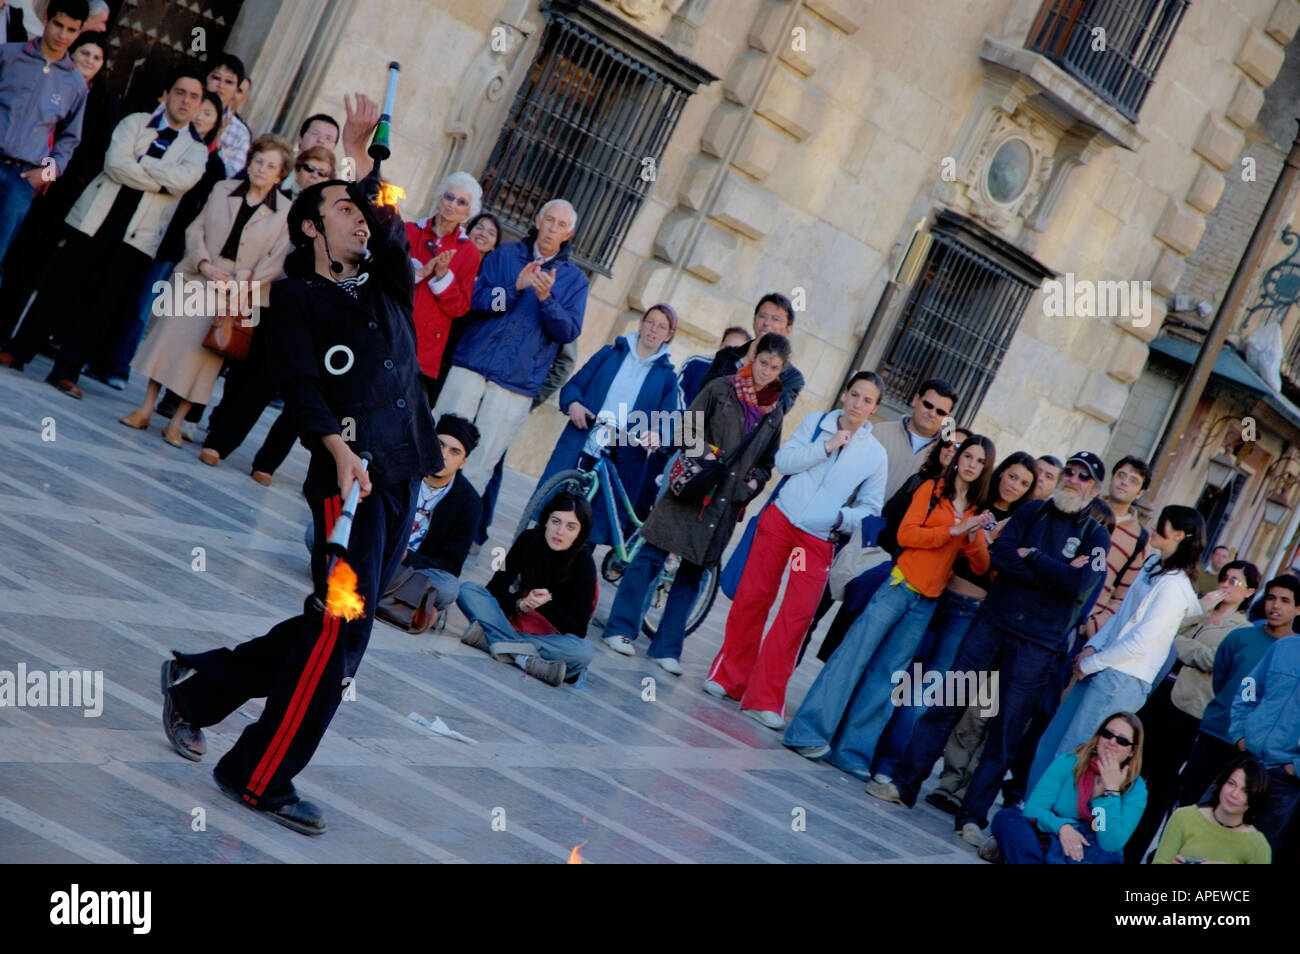 Street show performance in Albayzin, the old Islamic quarter of Granada, Andalusia, Spain. Stock Photo